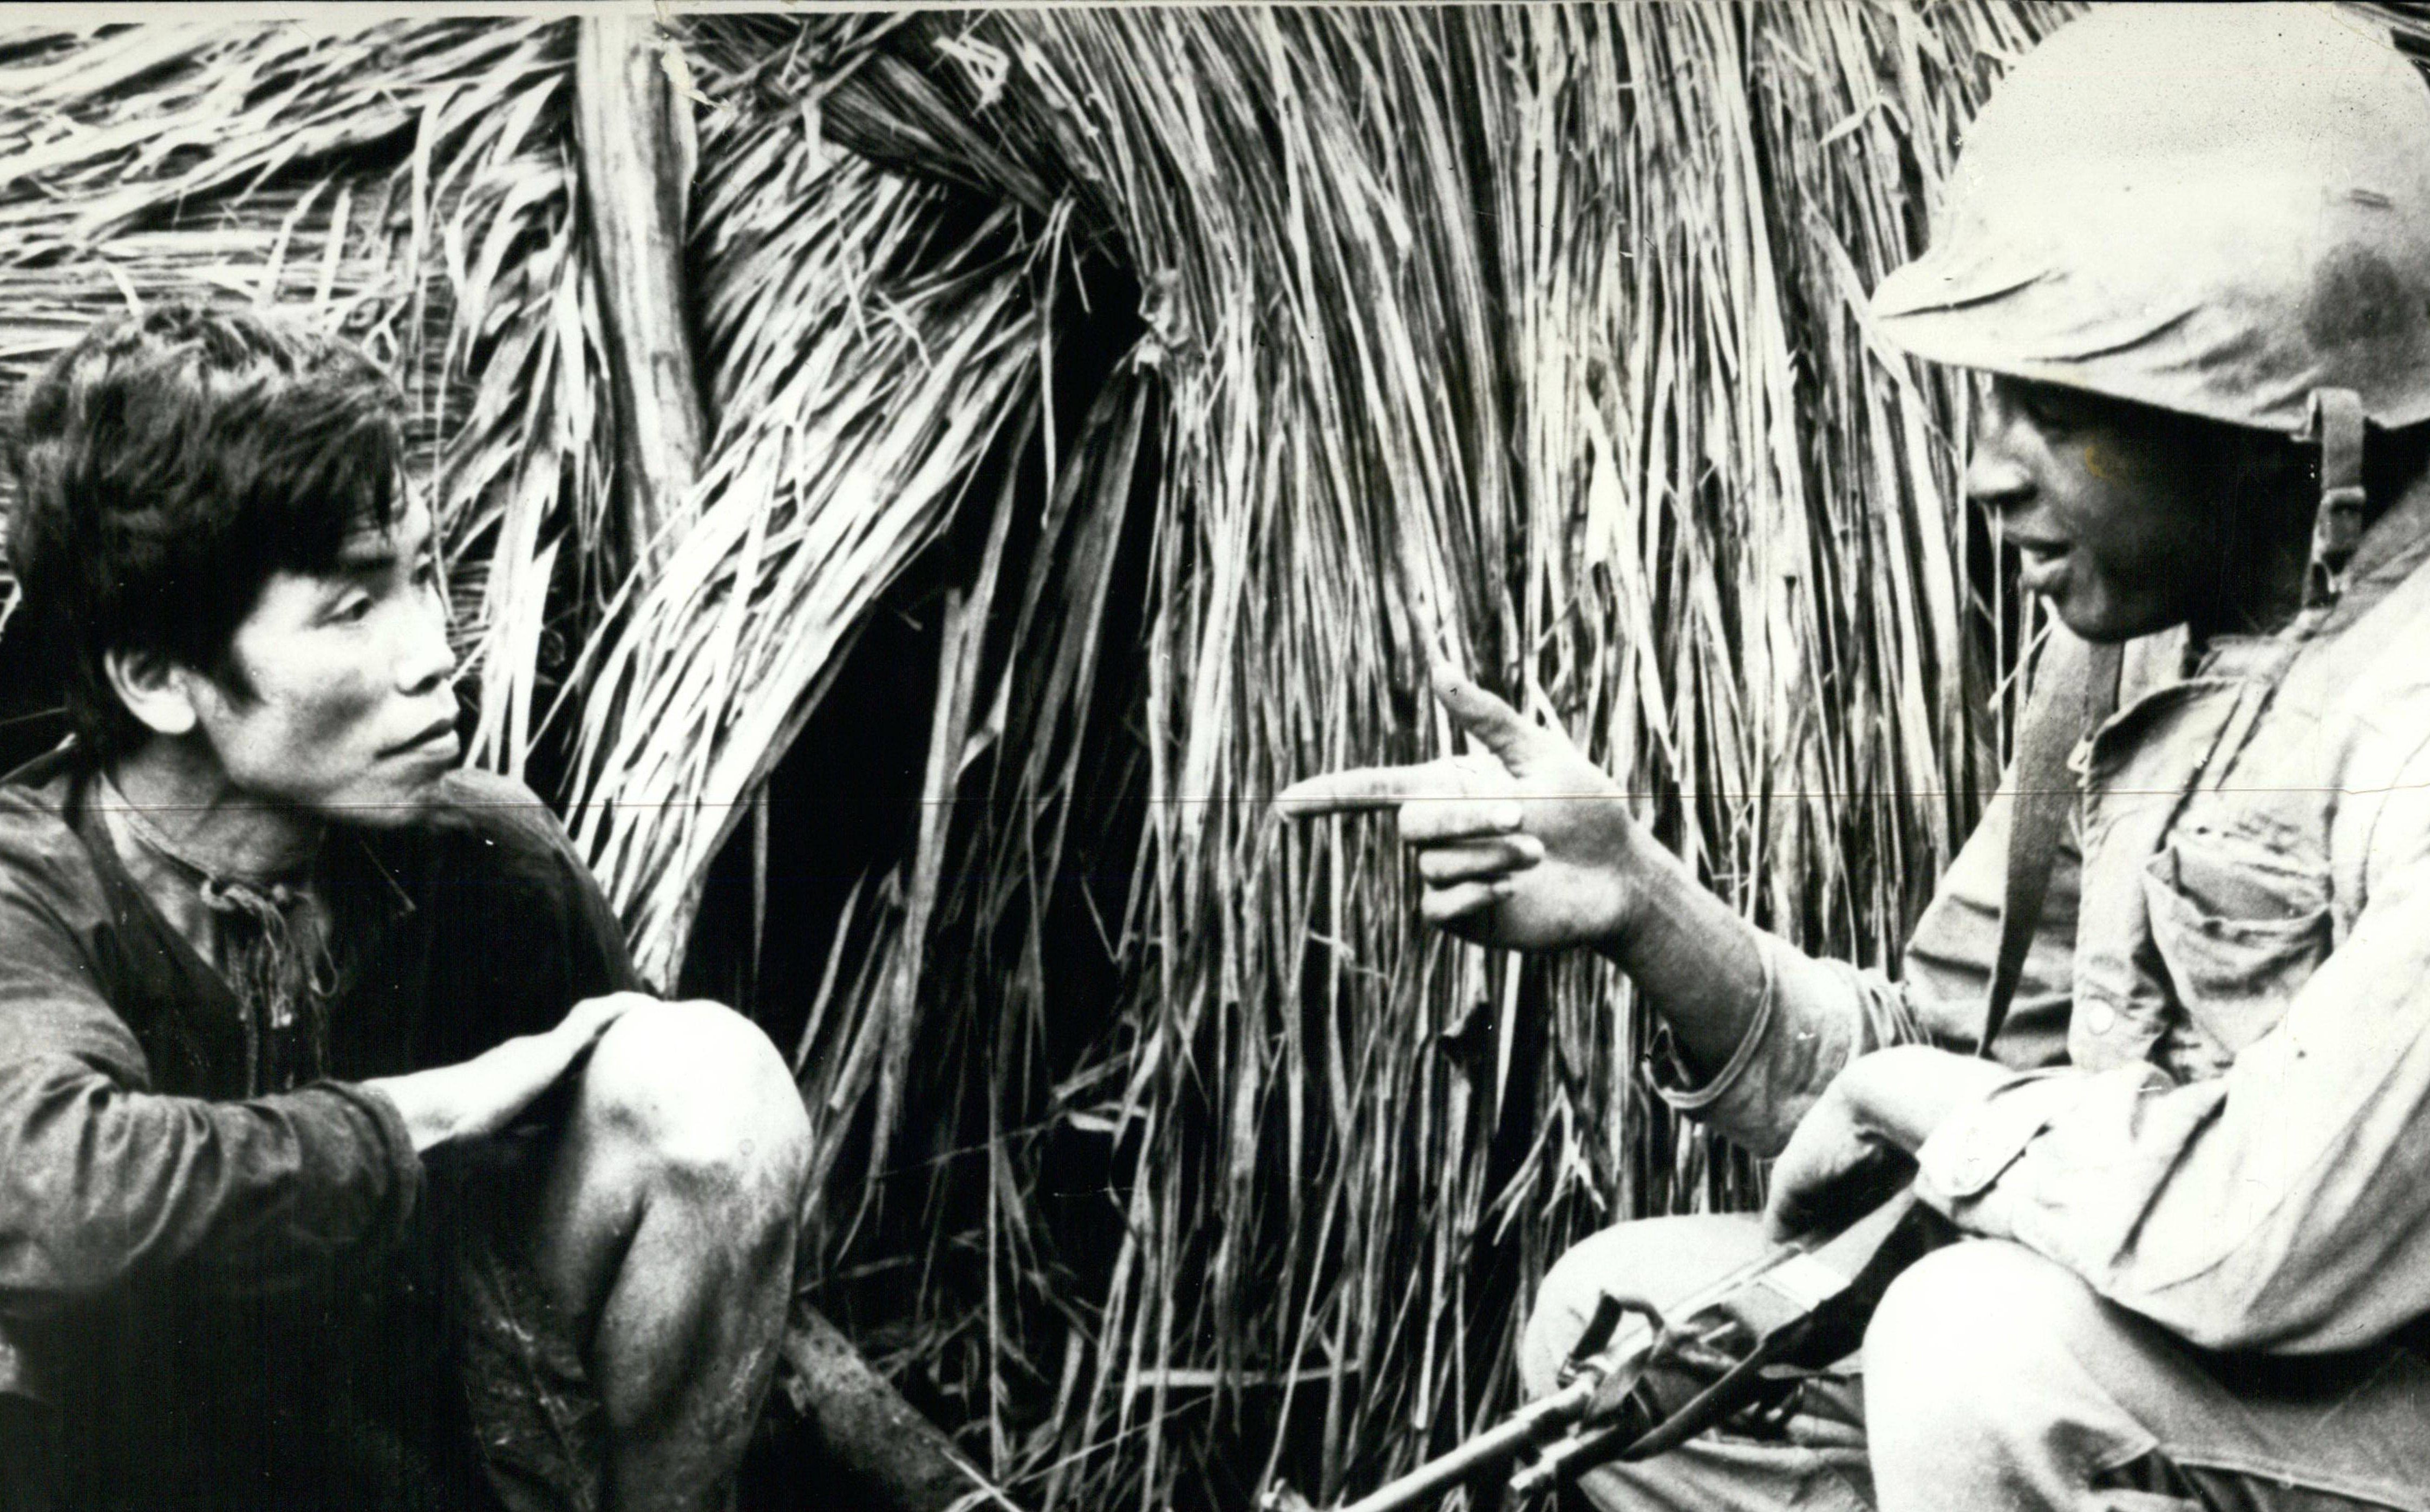 May 05, 1967 - War in Vietnam Viet Cong Tax collector caught: During an American Marine raid on a village in South vietnam they captured a Viet-Cong Tax collector.Marie Sergeant W.Robinson seen talking to him. PUBLICATIONxINxGERxONLY - ZUMAk09

May 05 1967 was in Vietnam Viet Cong Tax Collector Caught during to American Navy Raid ON a Village in South Vietnam They captured a Viet Cong Tax Collector Marie Sgt w Robinson Lakes Talking to HIM PUBLICATIONxINxGERxONLY ZUMAk09